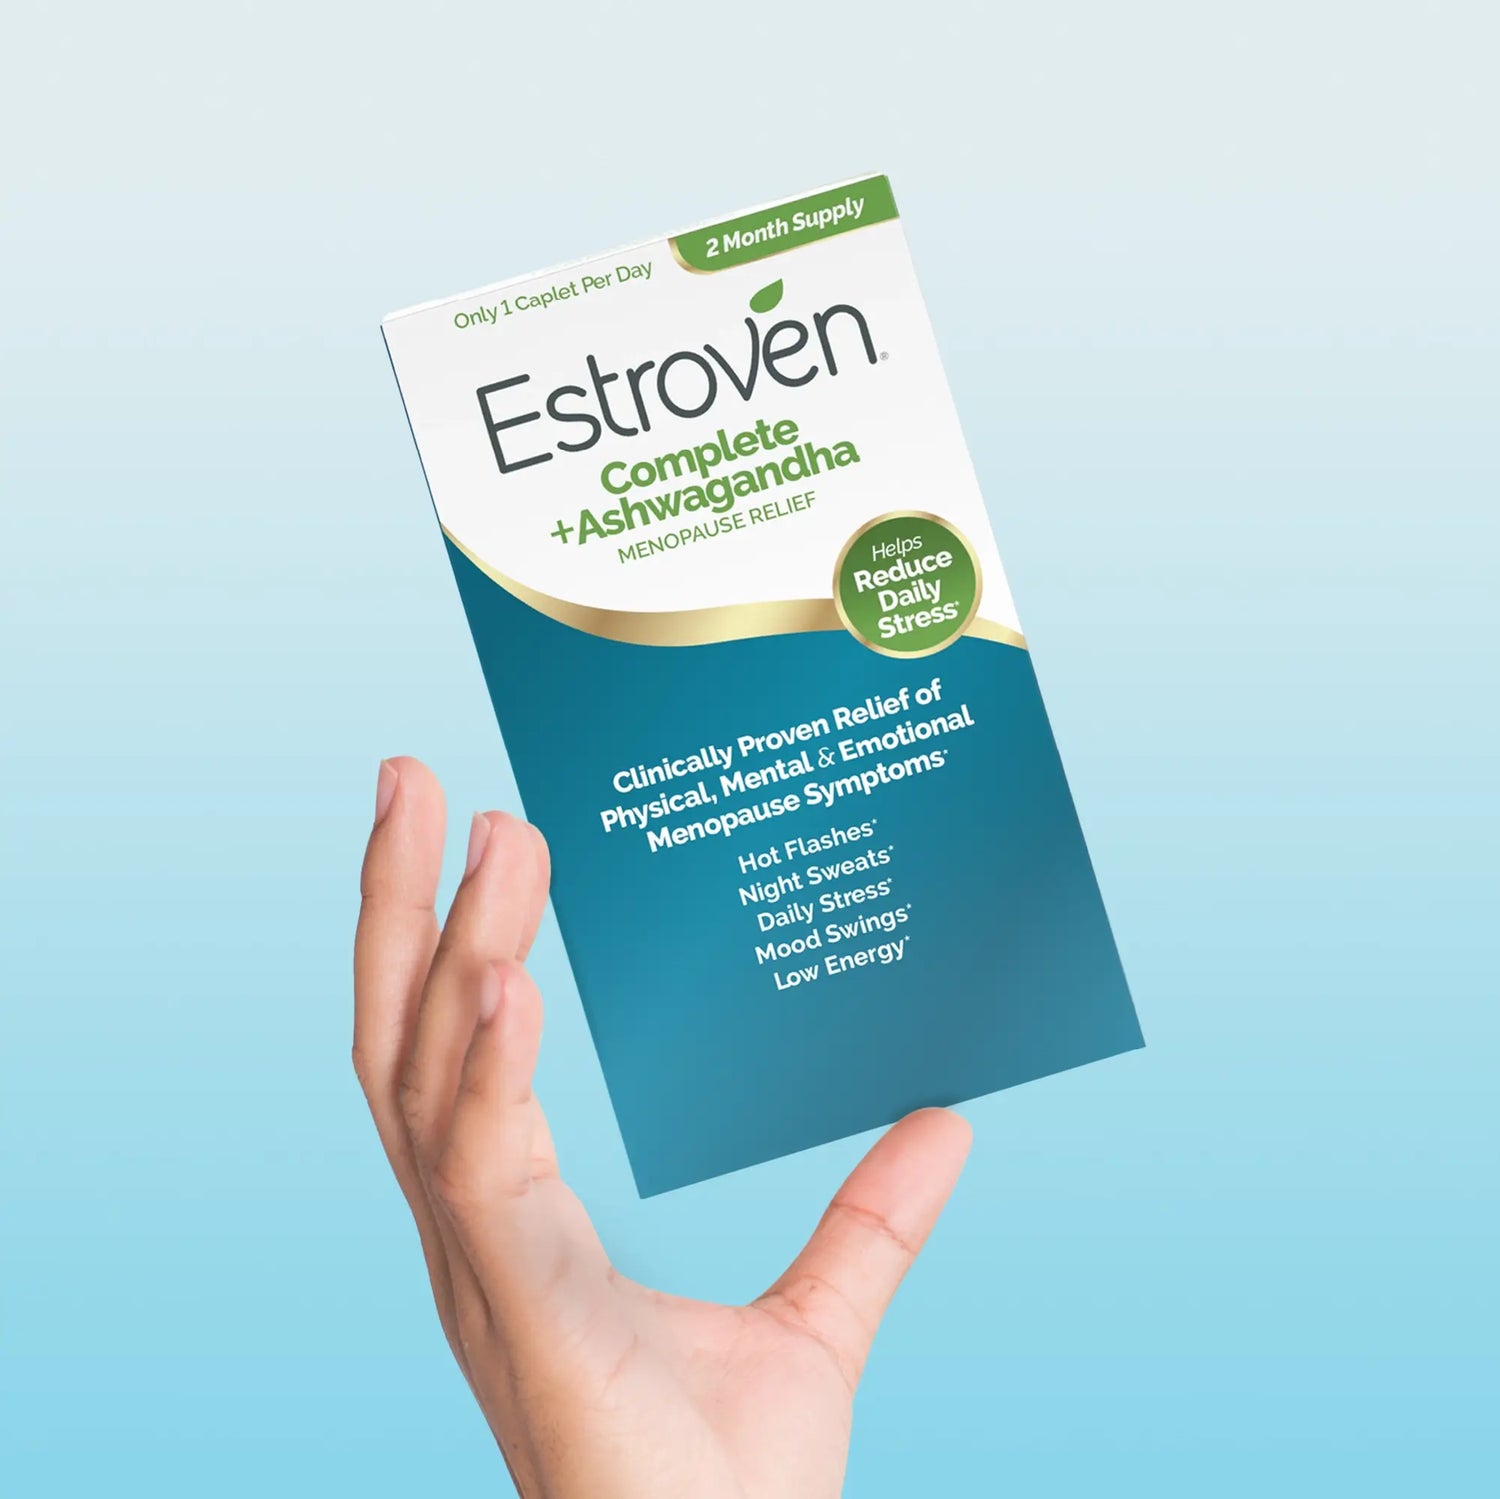 hand holding up box of Estroven Complete Ashwagandha